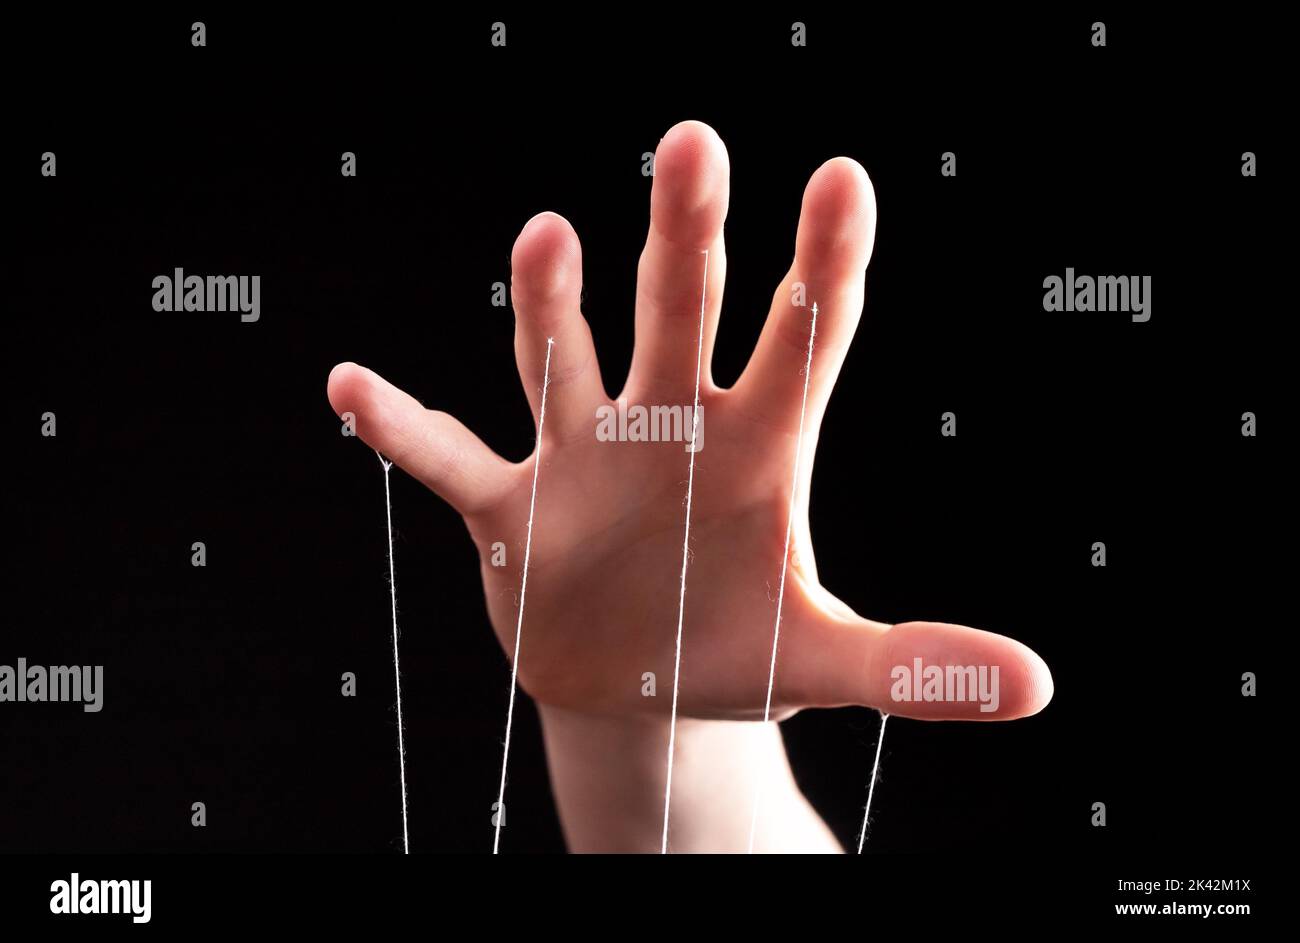 Manipulation, authority concept. Hand with strings controlling, manipulating smth abstract. Stock Photo